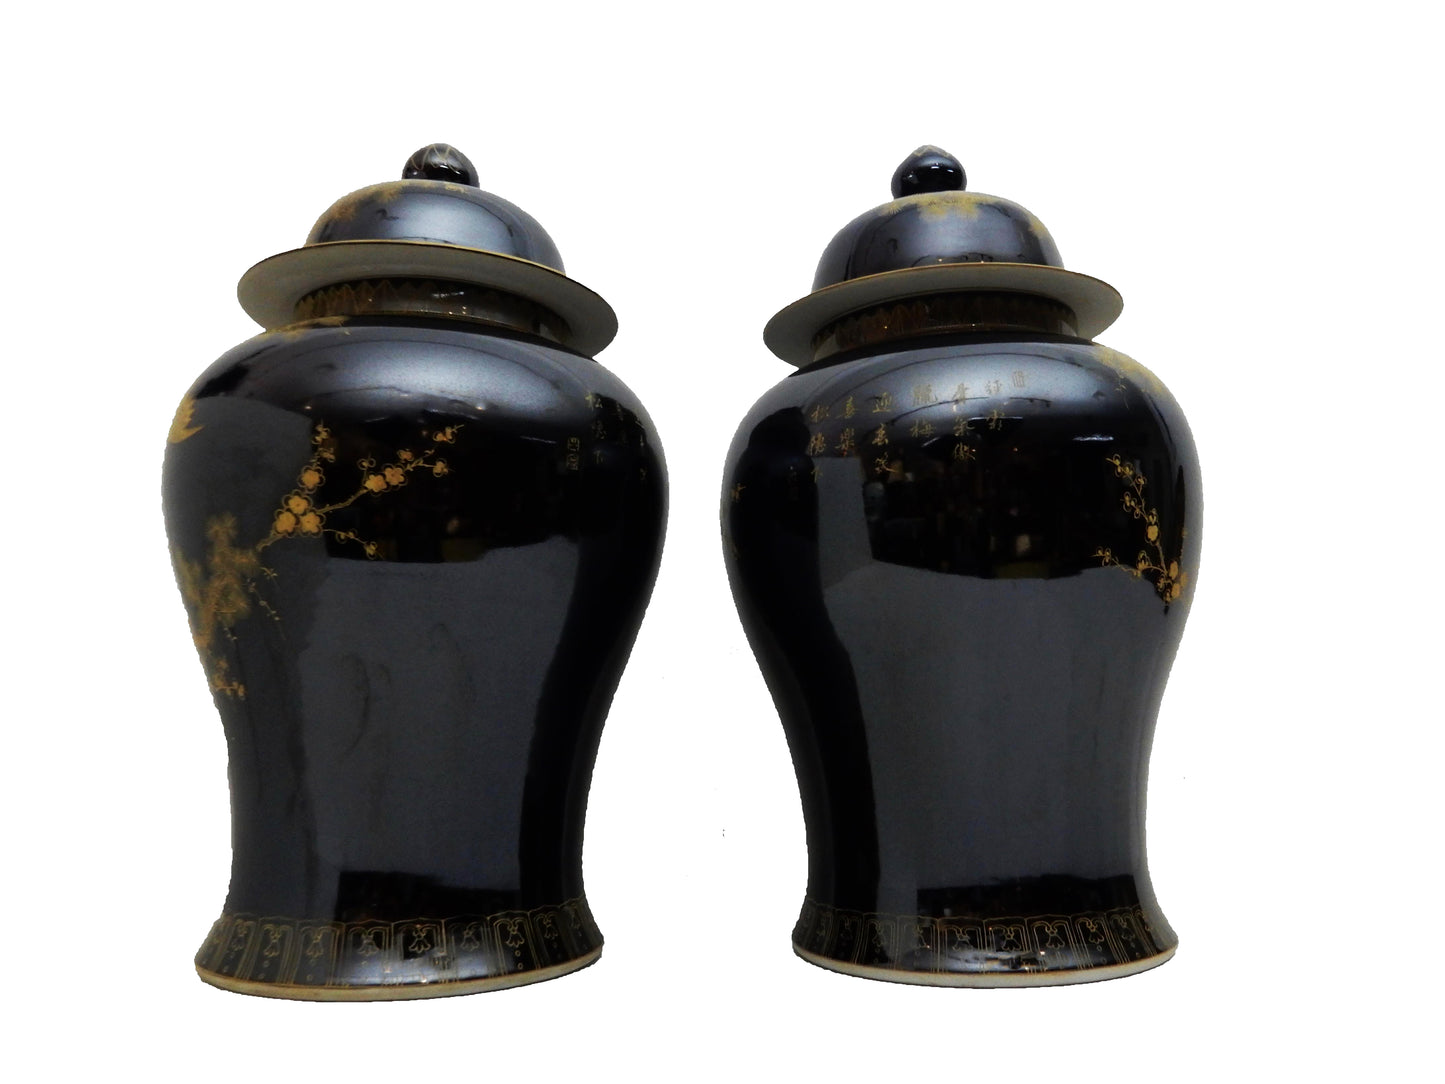 #5784 Chinoiserie Famille Noire Porcelain Ginger Jars - a Pair 22.5" H